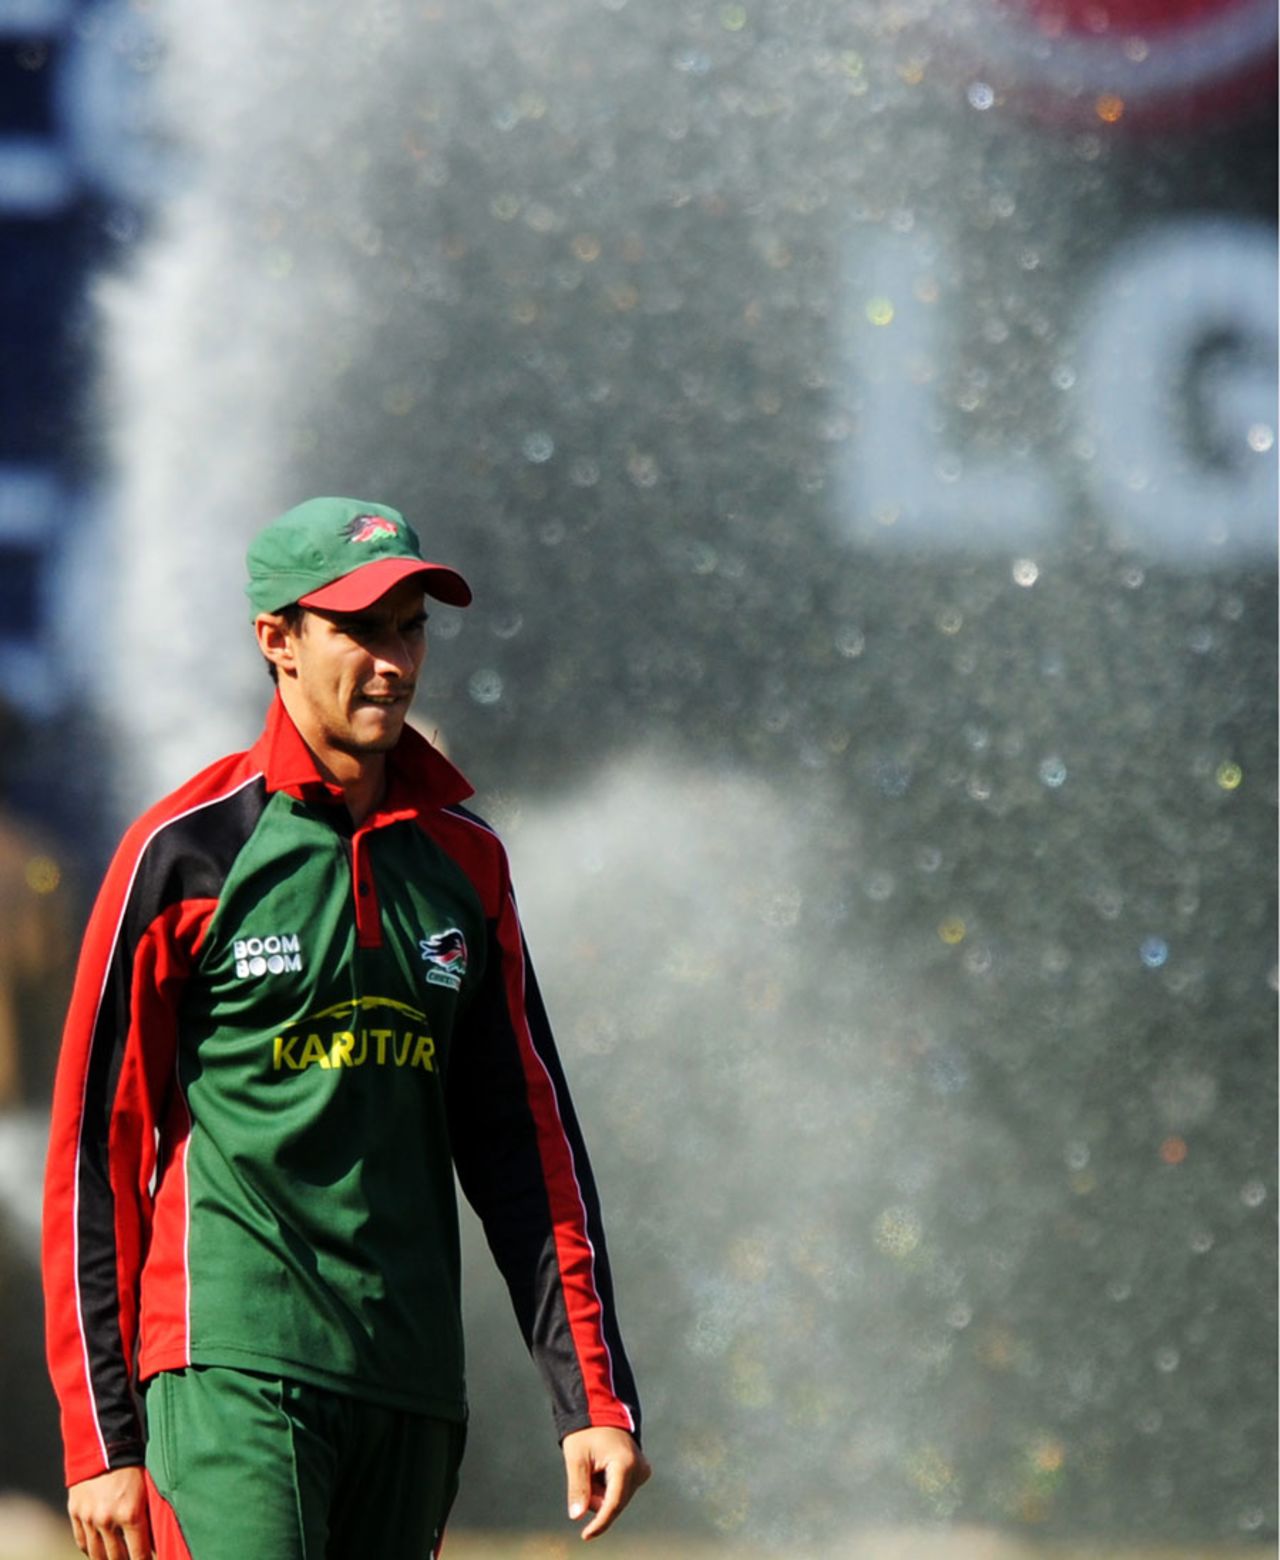 Seren Waters looks on during Kenya's practice session as the outfield is watered, Bangalore, March 12, 2011